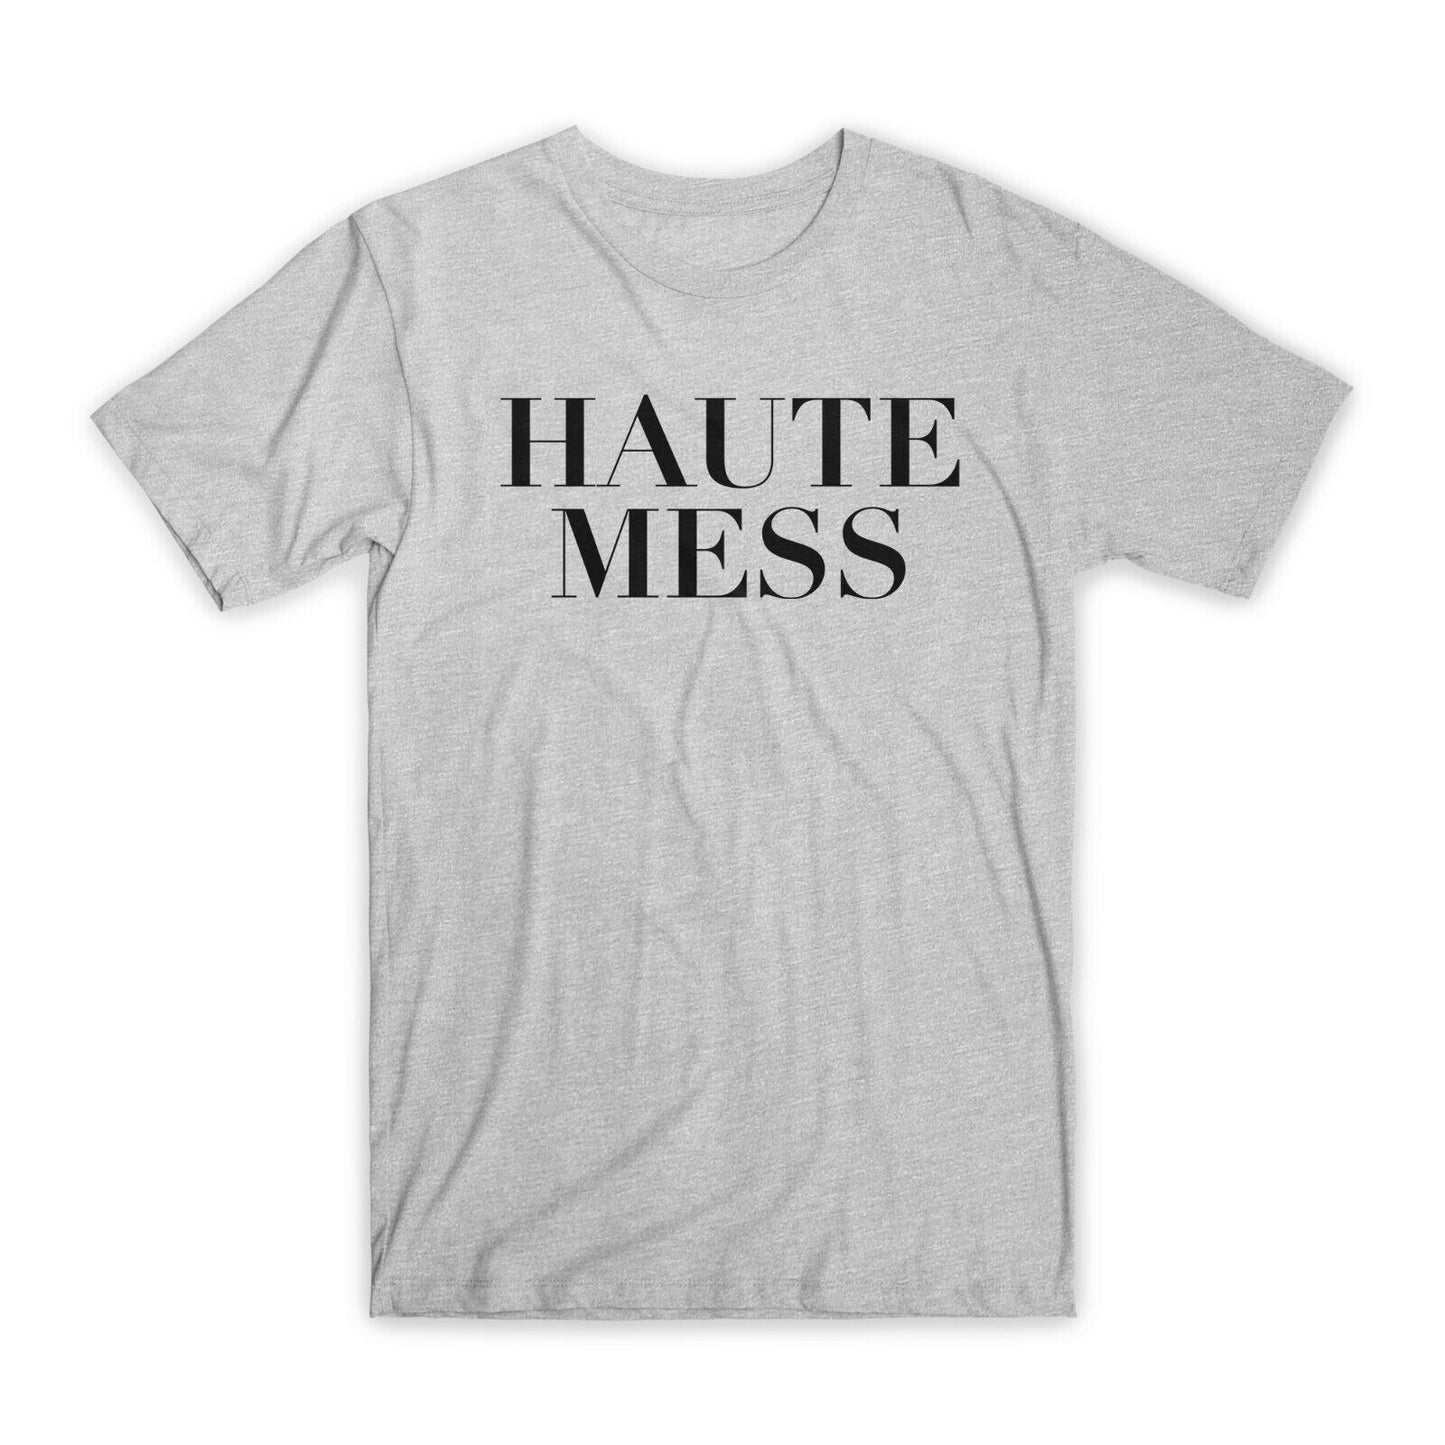 Haute Mess T-Shirt Premium Soft Cotton Crew Neck Funny Tees Novelty Gifts NEW